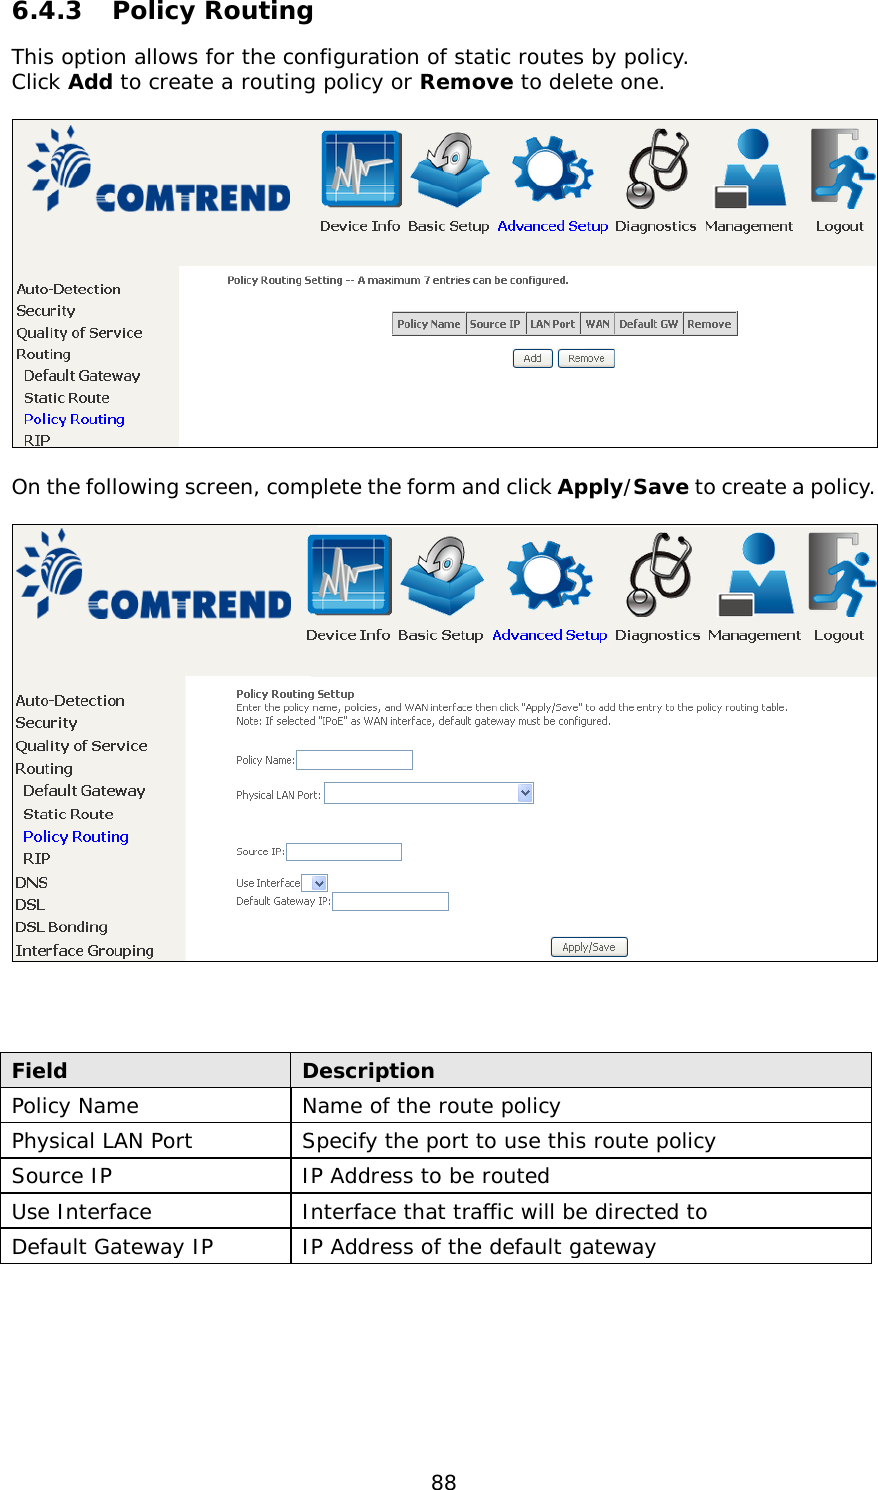  88 6.4.3 Policy Routing This option allows for the configuration of static routes by policy.  Click Add to create a routing policy or Remove to delete one.    On the following screen, complete the form and click Apply/Save to create a policy.      Field Description Policy Name Name of the route policy Physical LAN Port Specify the port to use this route policy Source IP IP Address to be routed Use Interface Interface that traffic will be directed to Default Gateway IP IP Address of the default gateway 